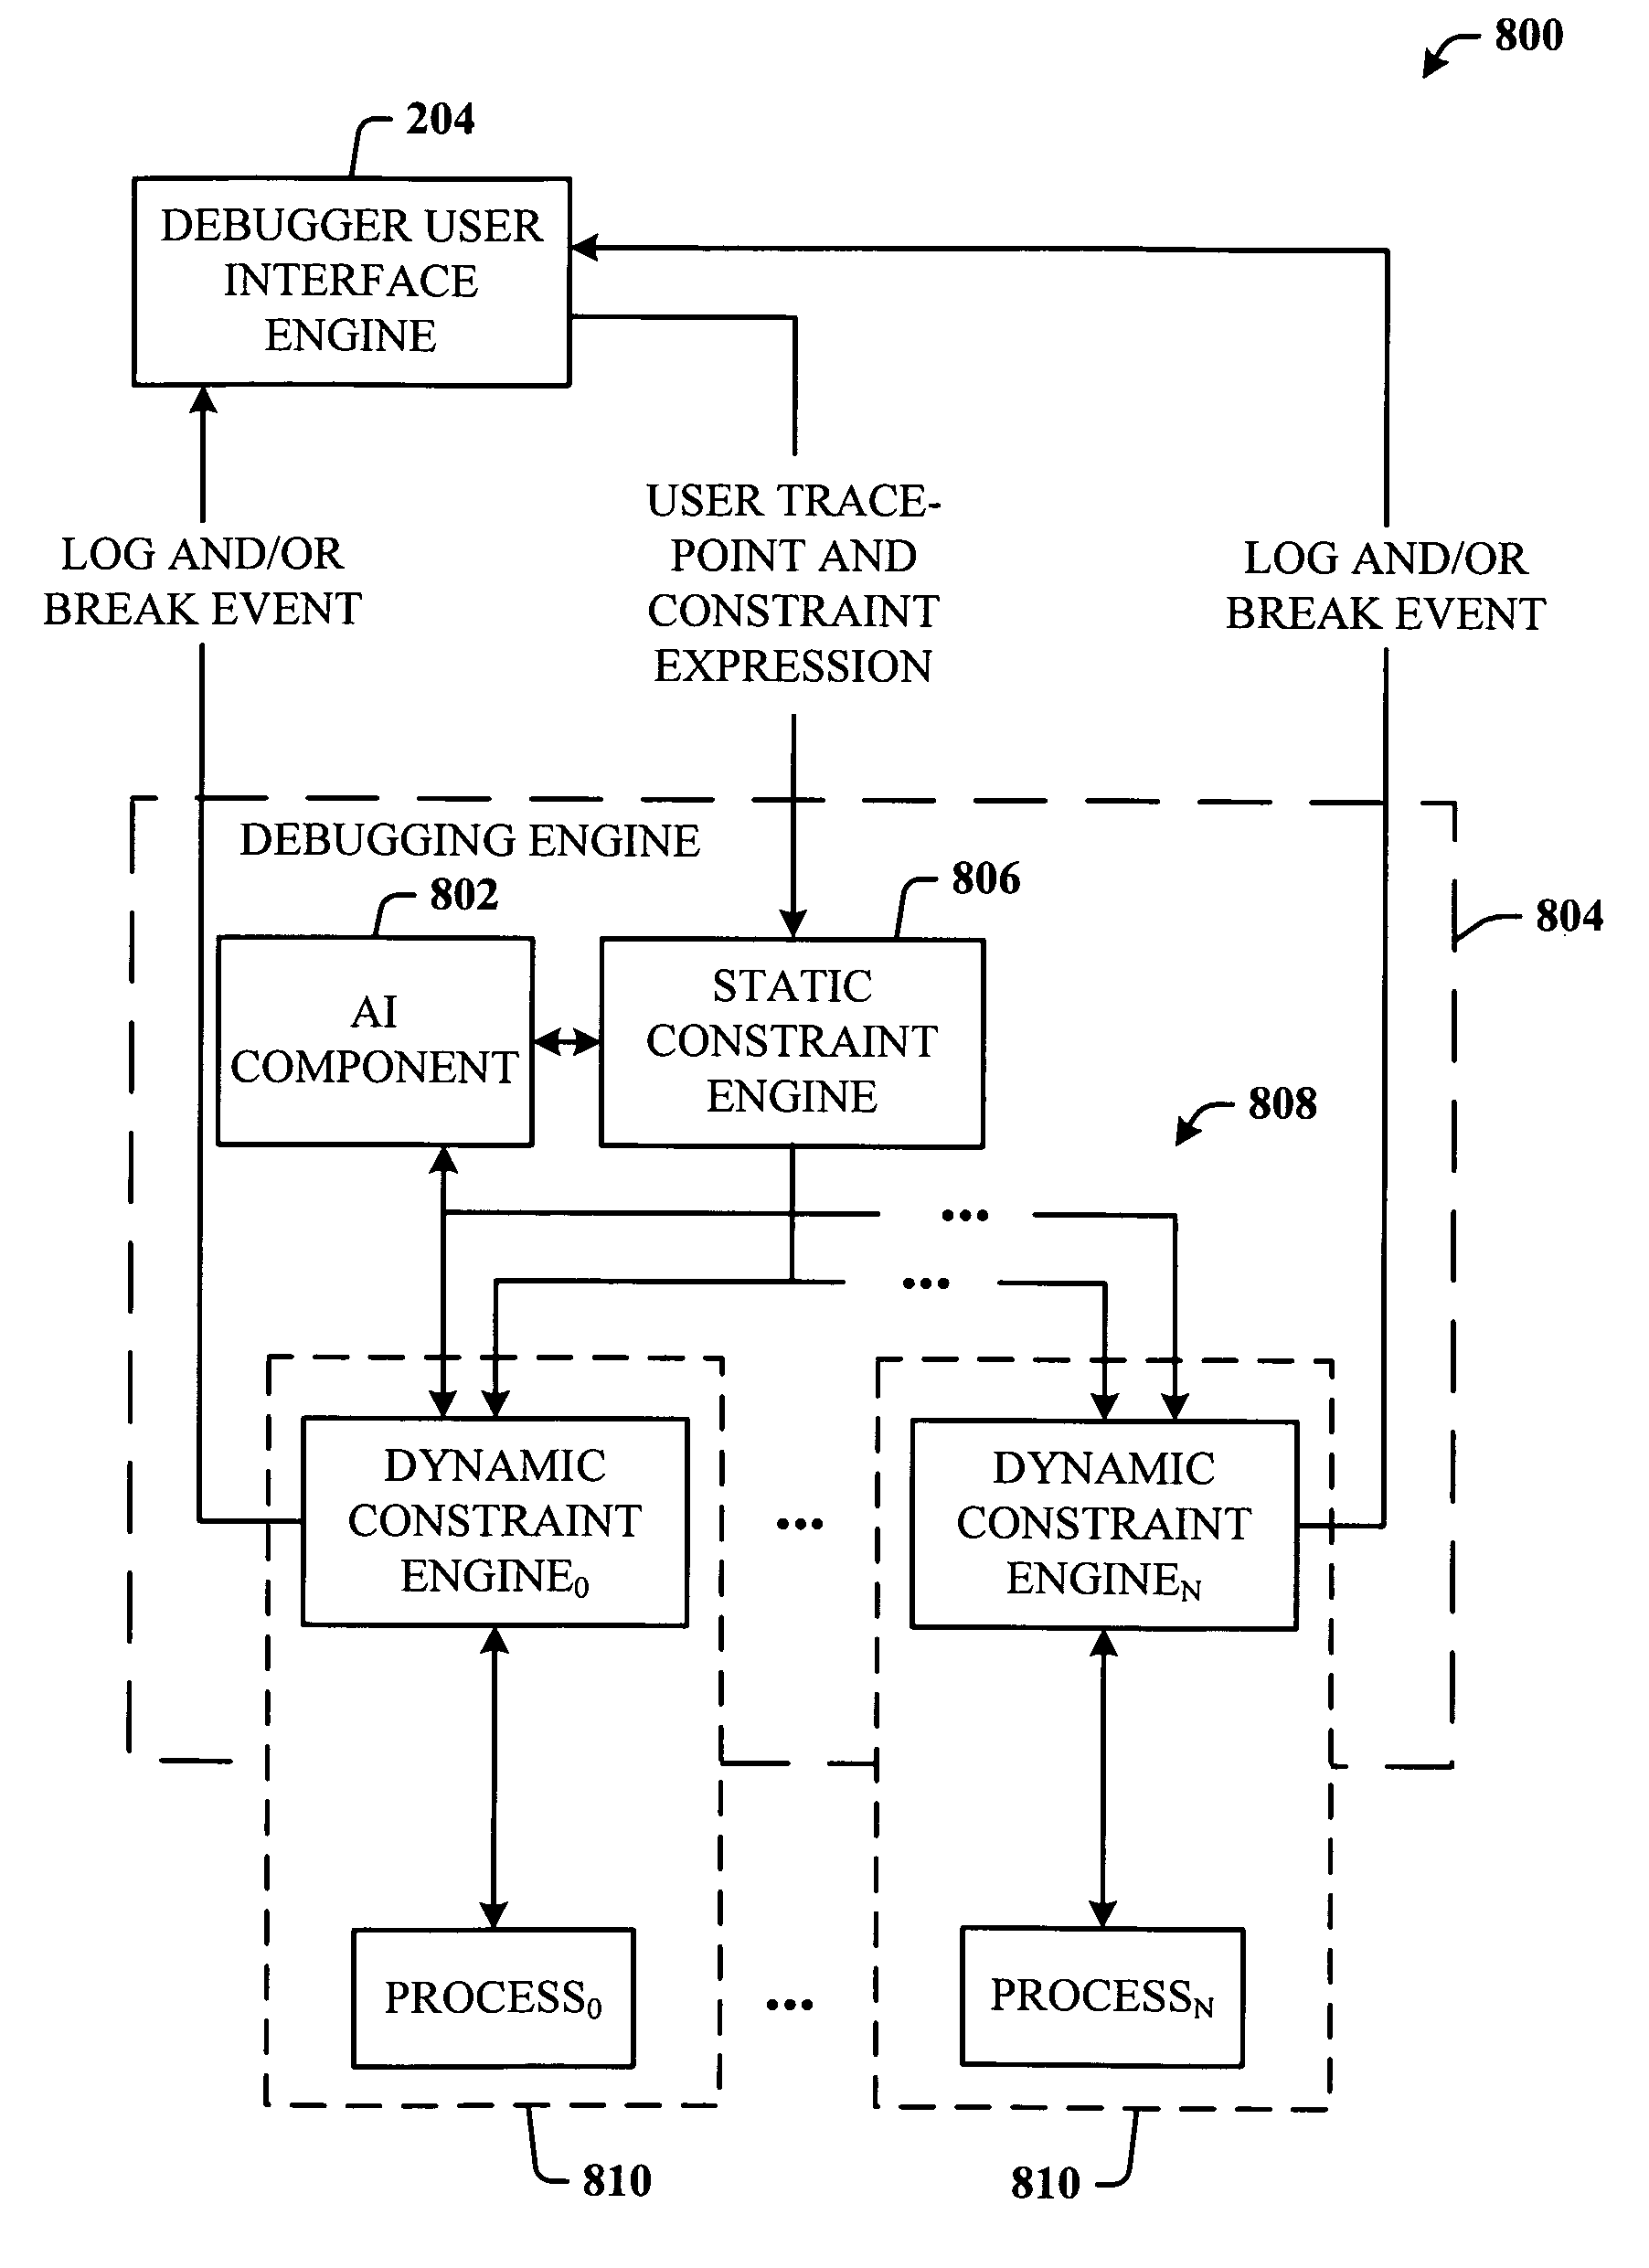 Breakpoint logging and constraint mechanisms for parallel computing systems